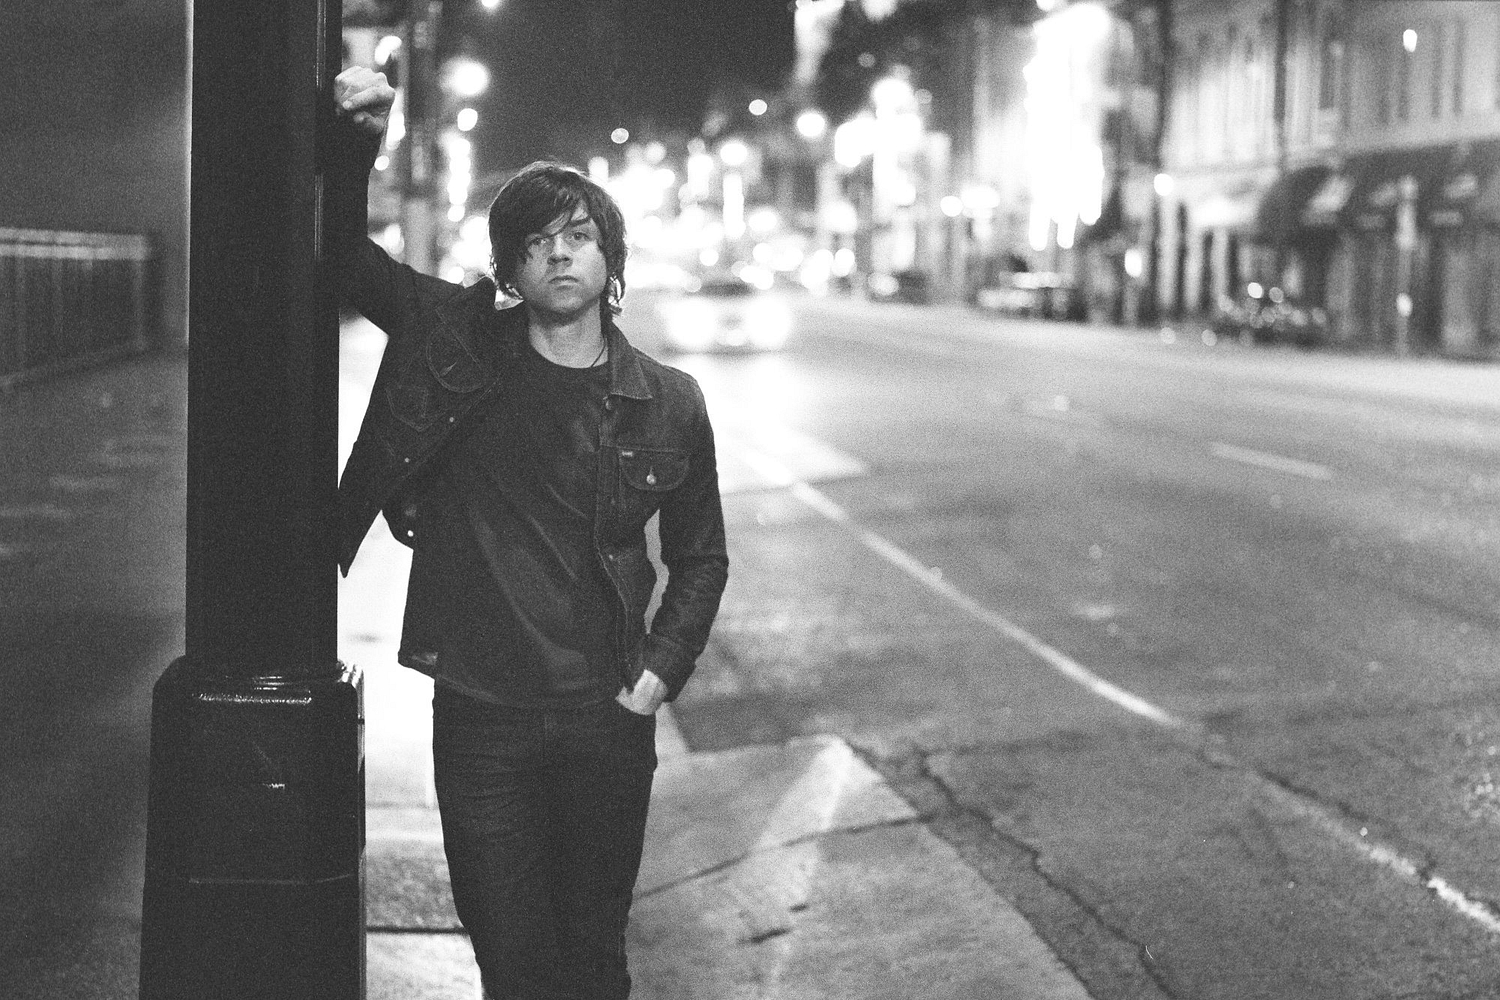 Ryan Adams accused of sexual misconduct by several women